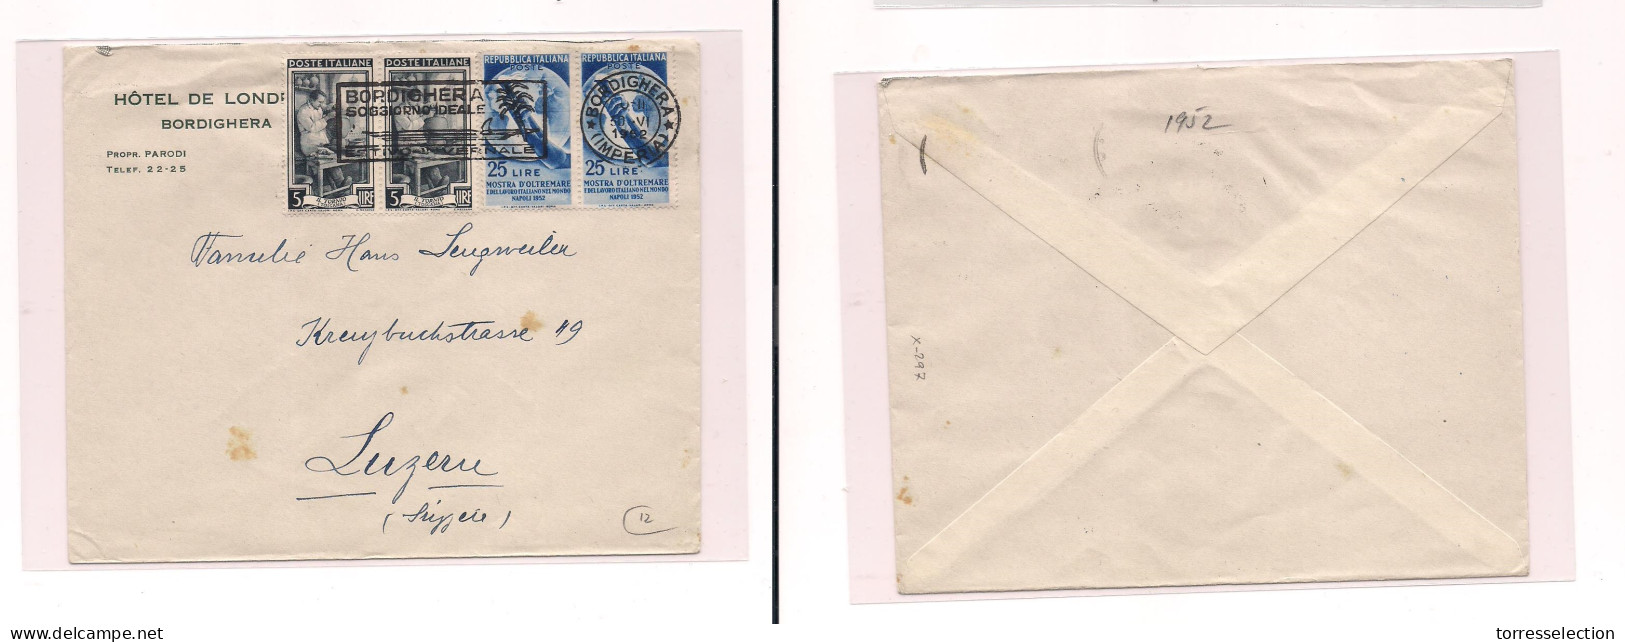 ITALY. Cover -  1920 Voltri To Switz Geneve Express Fkd Env. Easy Deal. XSALE. - Unclassified